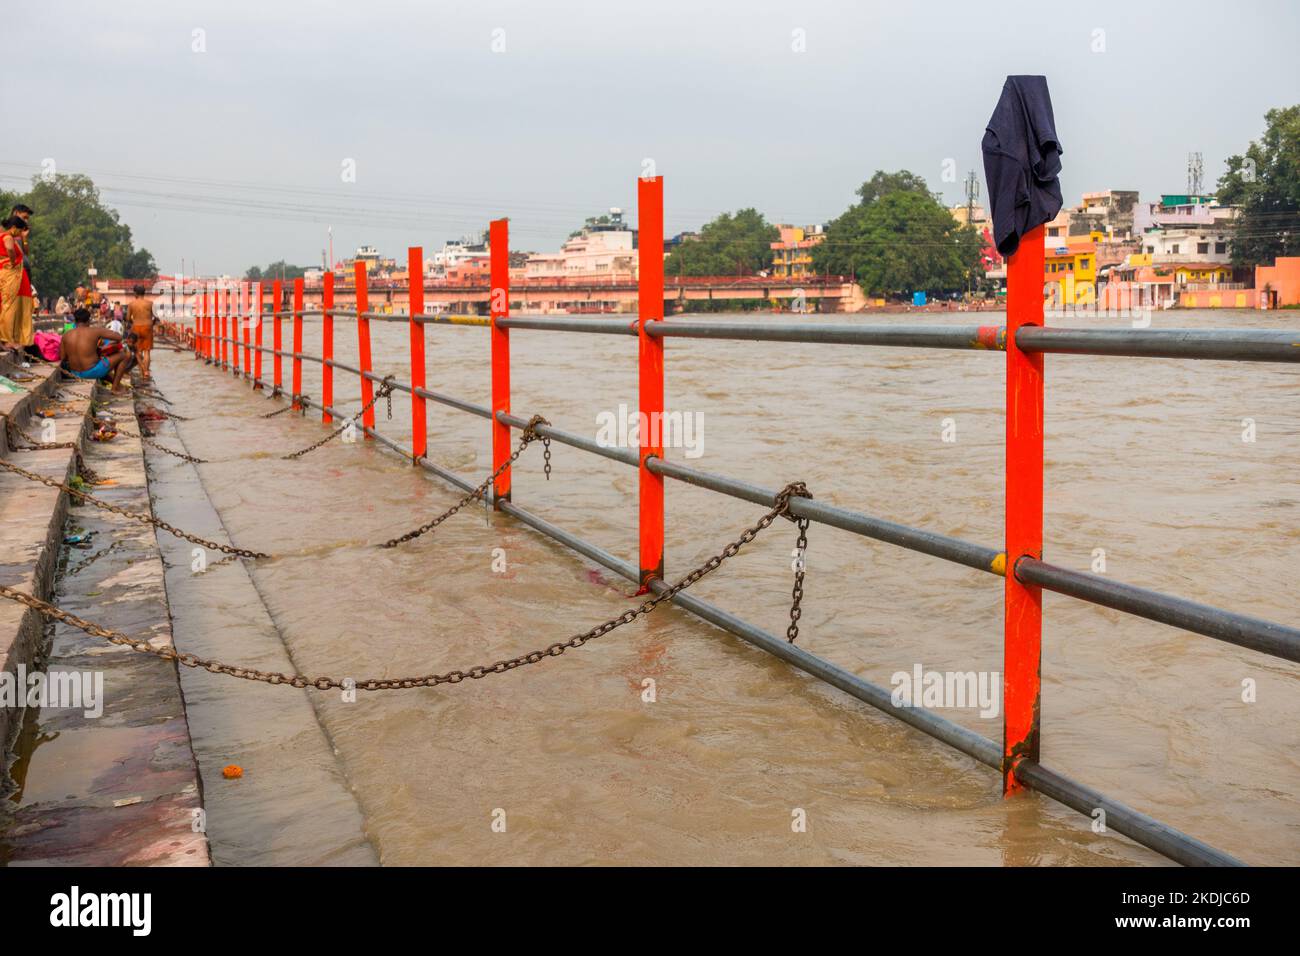 July 8th 2022 Haridwar India. Chains and Iron barricading at the ghats or banks of river Ganges for public safety during bathing. Stock Photo